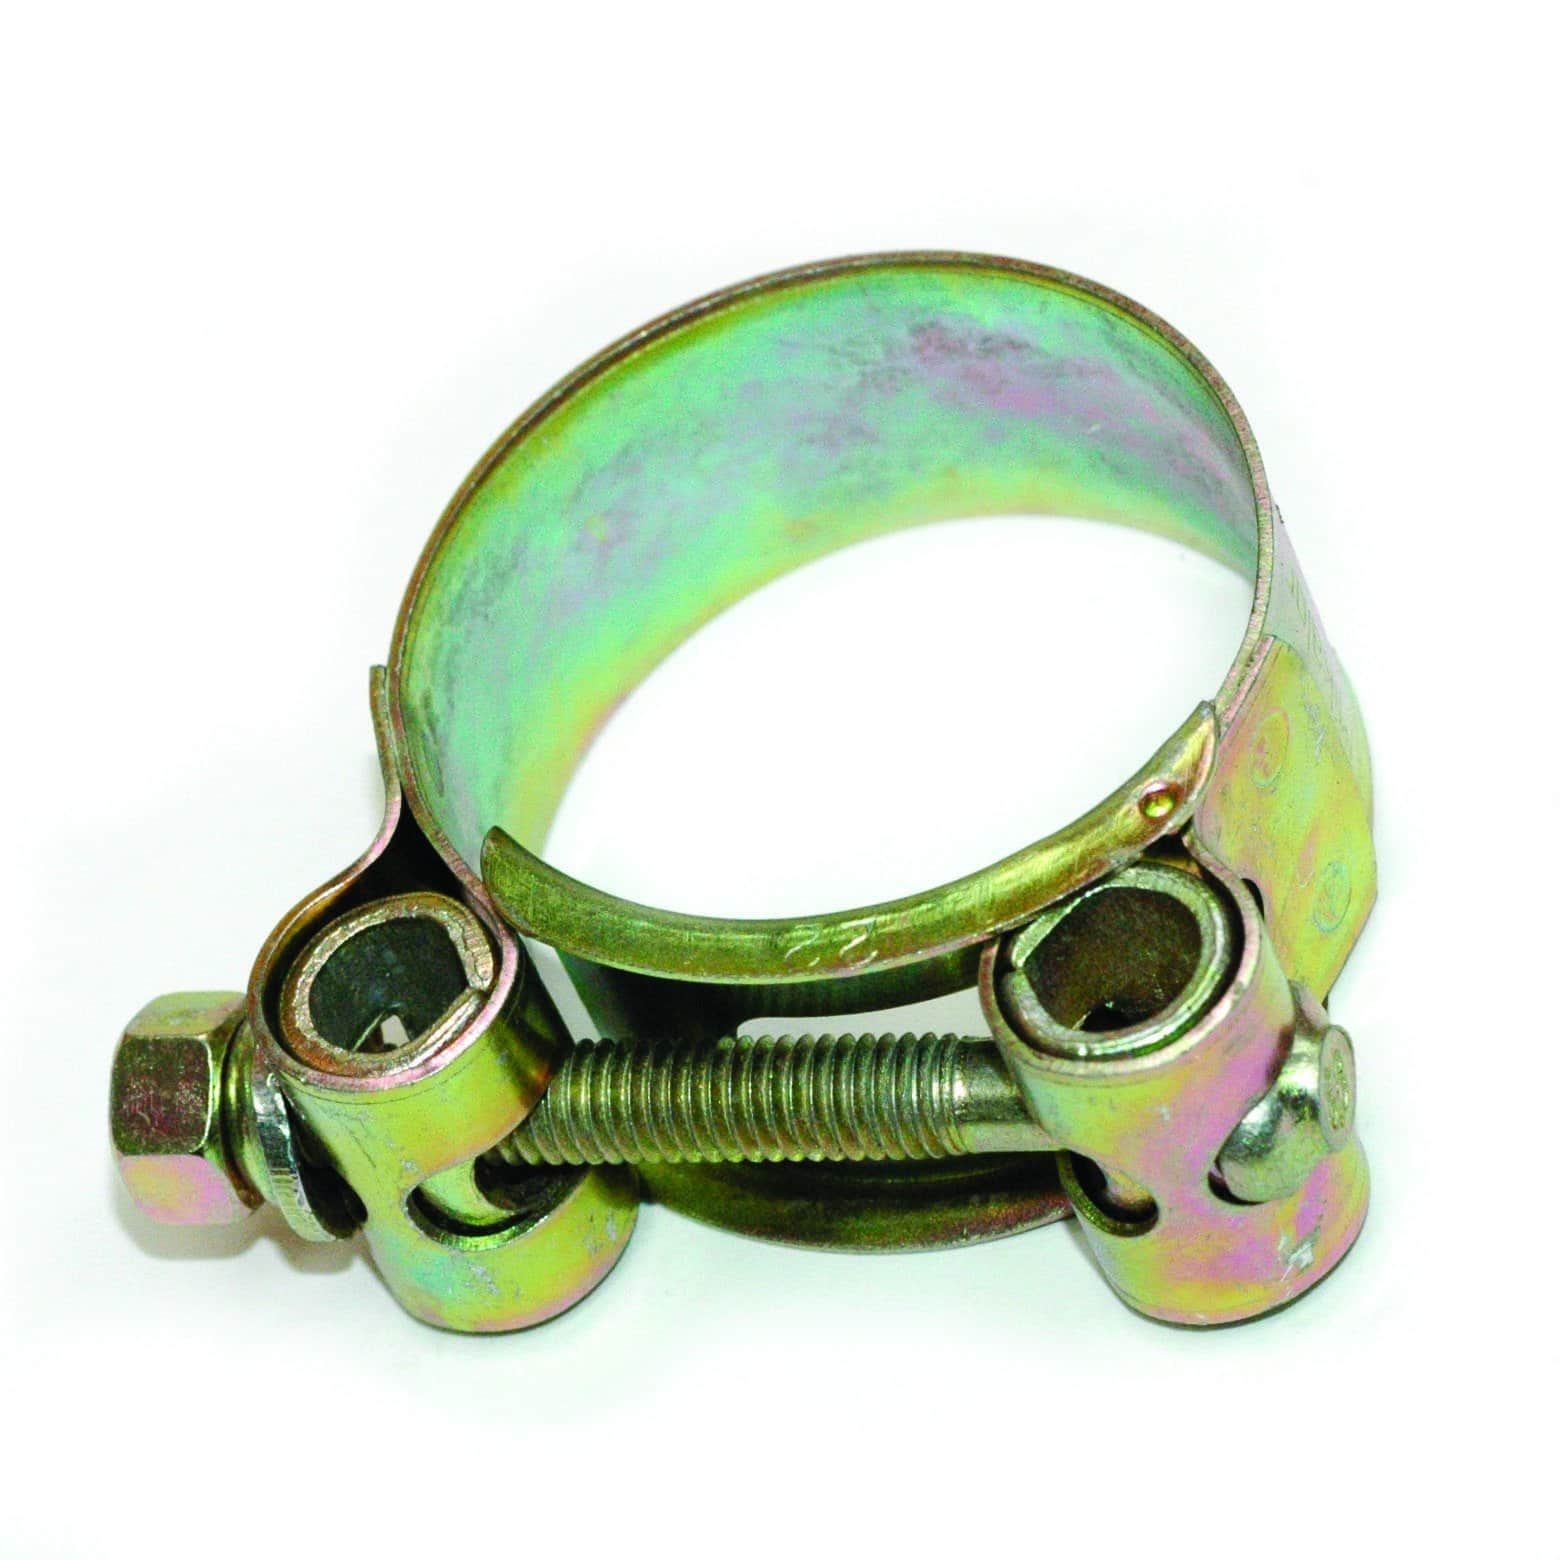 Zinc plated t-bolt clamp fitting